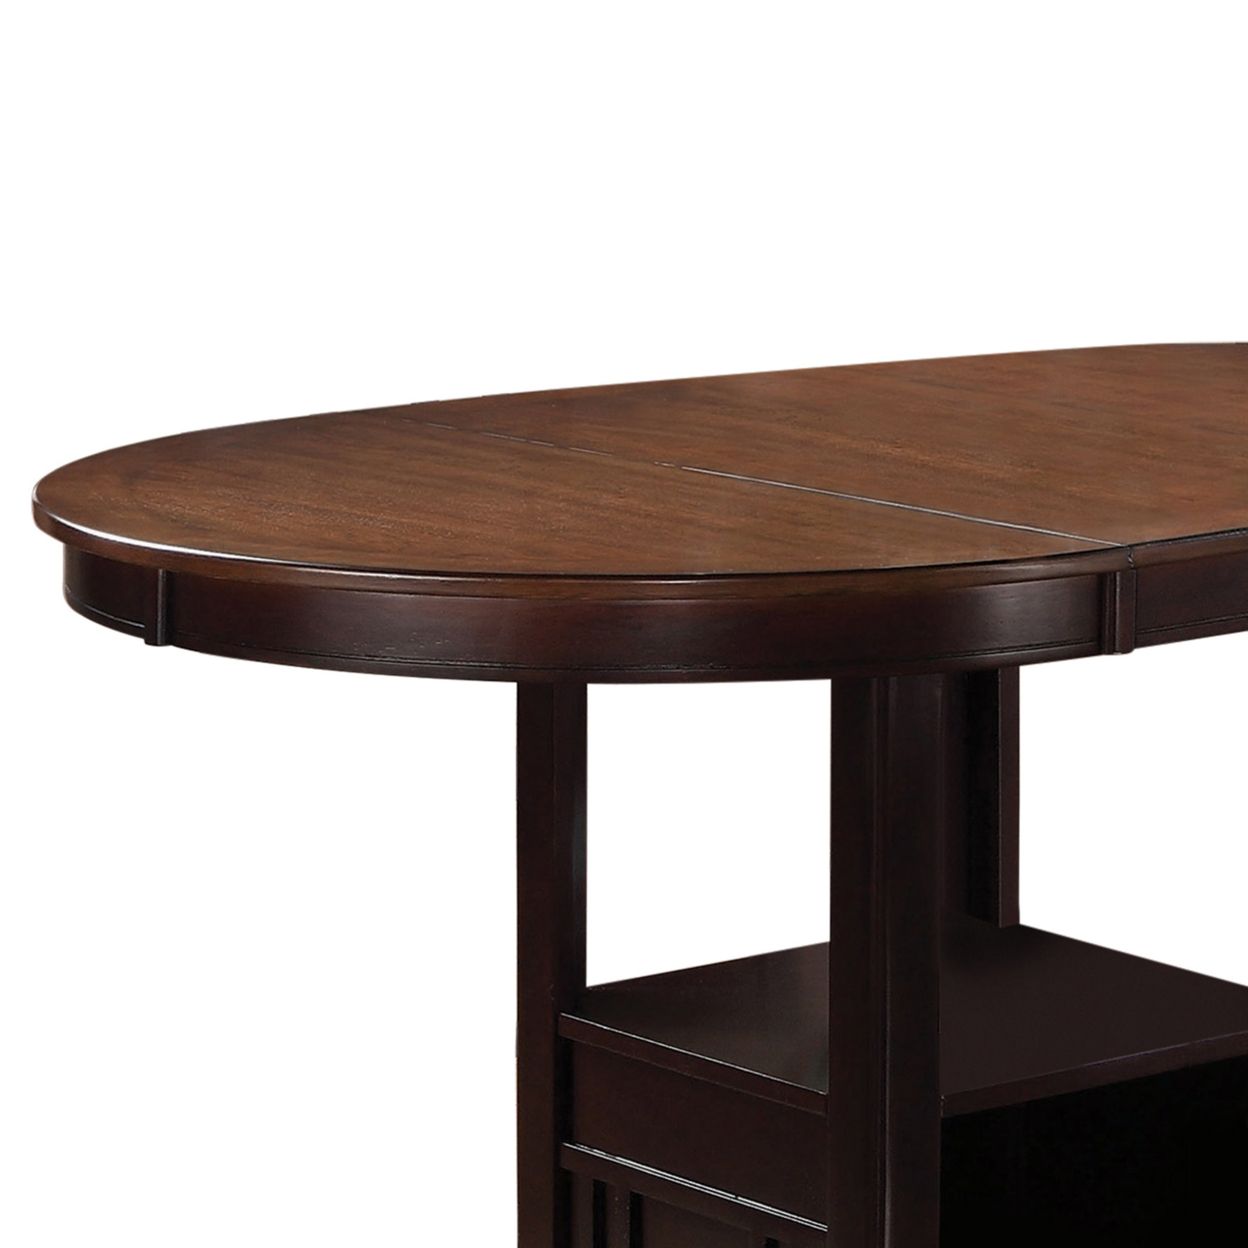 Dual Tone Counter Height Dining Table With Storage Base, Brown- Saltoro Sherpi